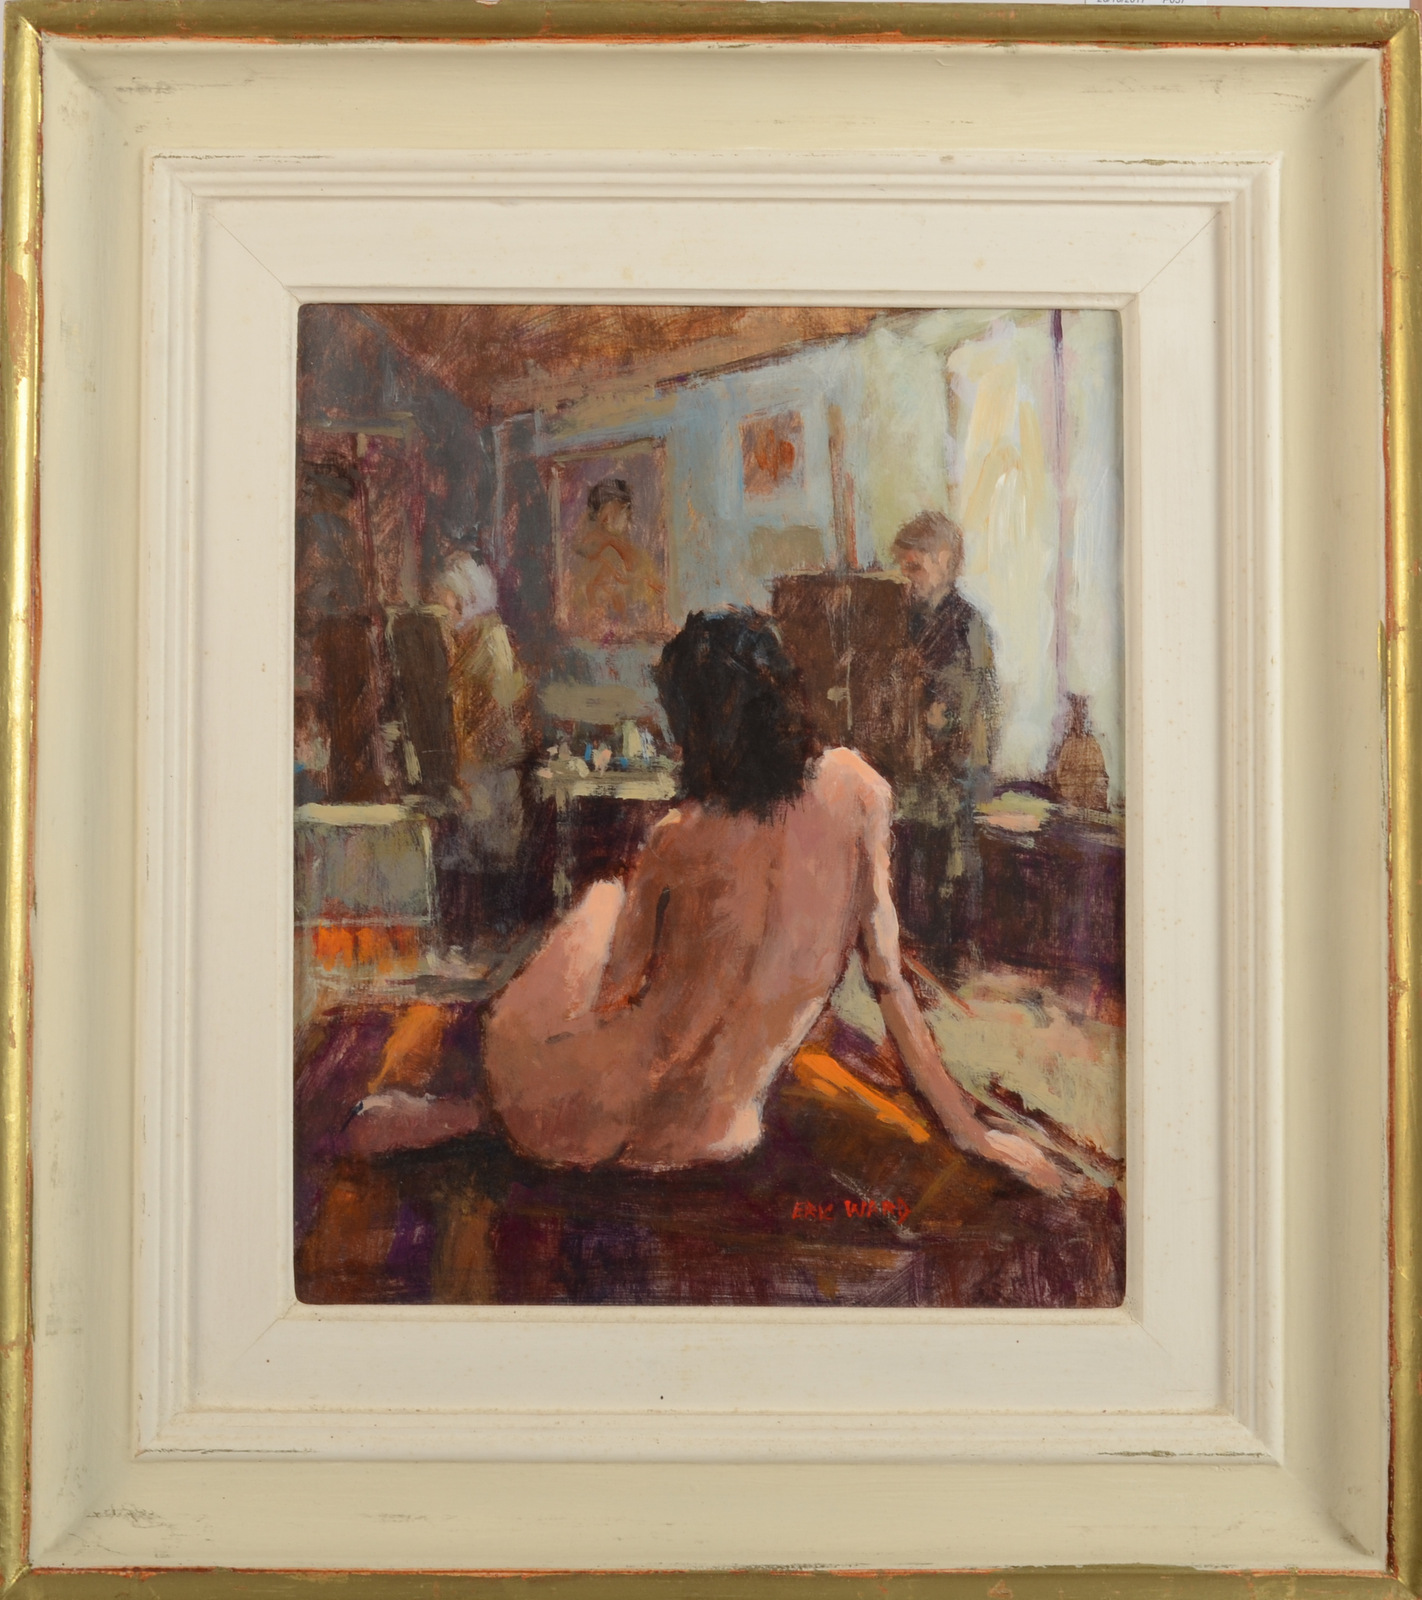 ERIC WARD Life Drawing Class Oil on board Signed 29 x 24 cm - Image 2 of 2